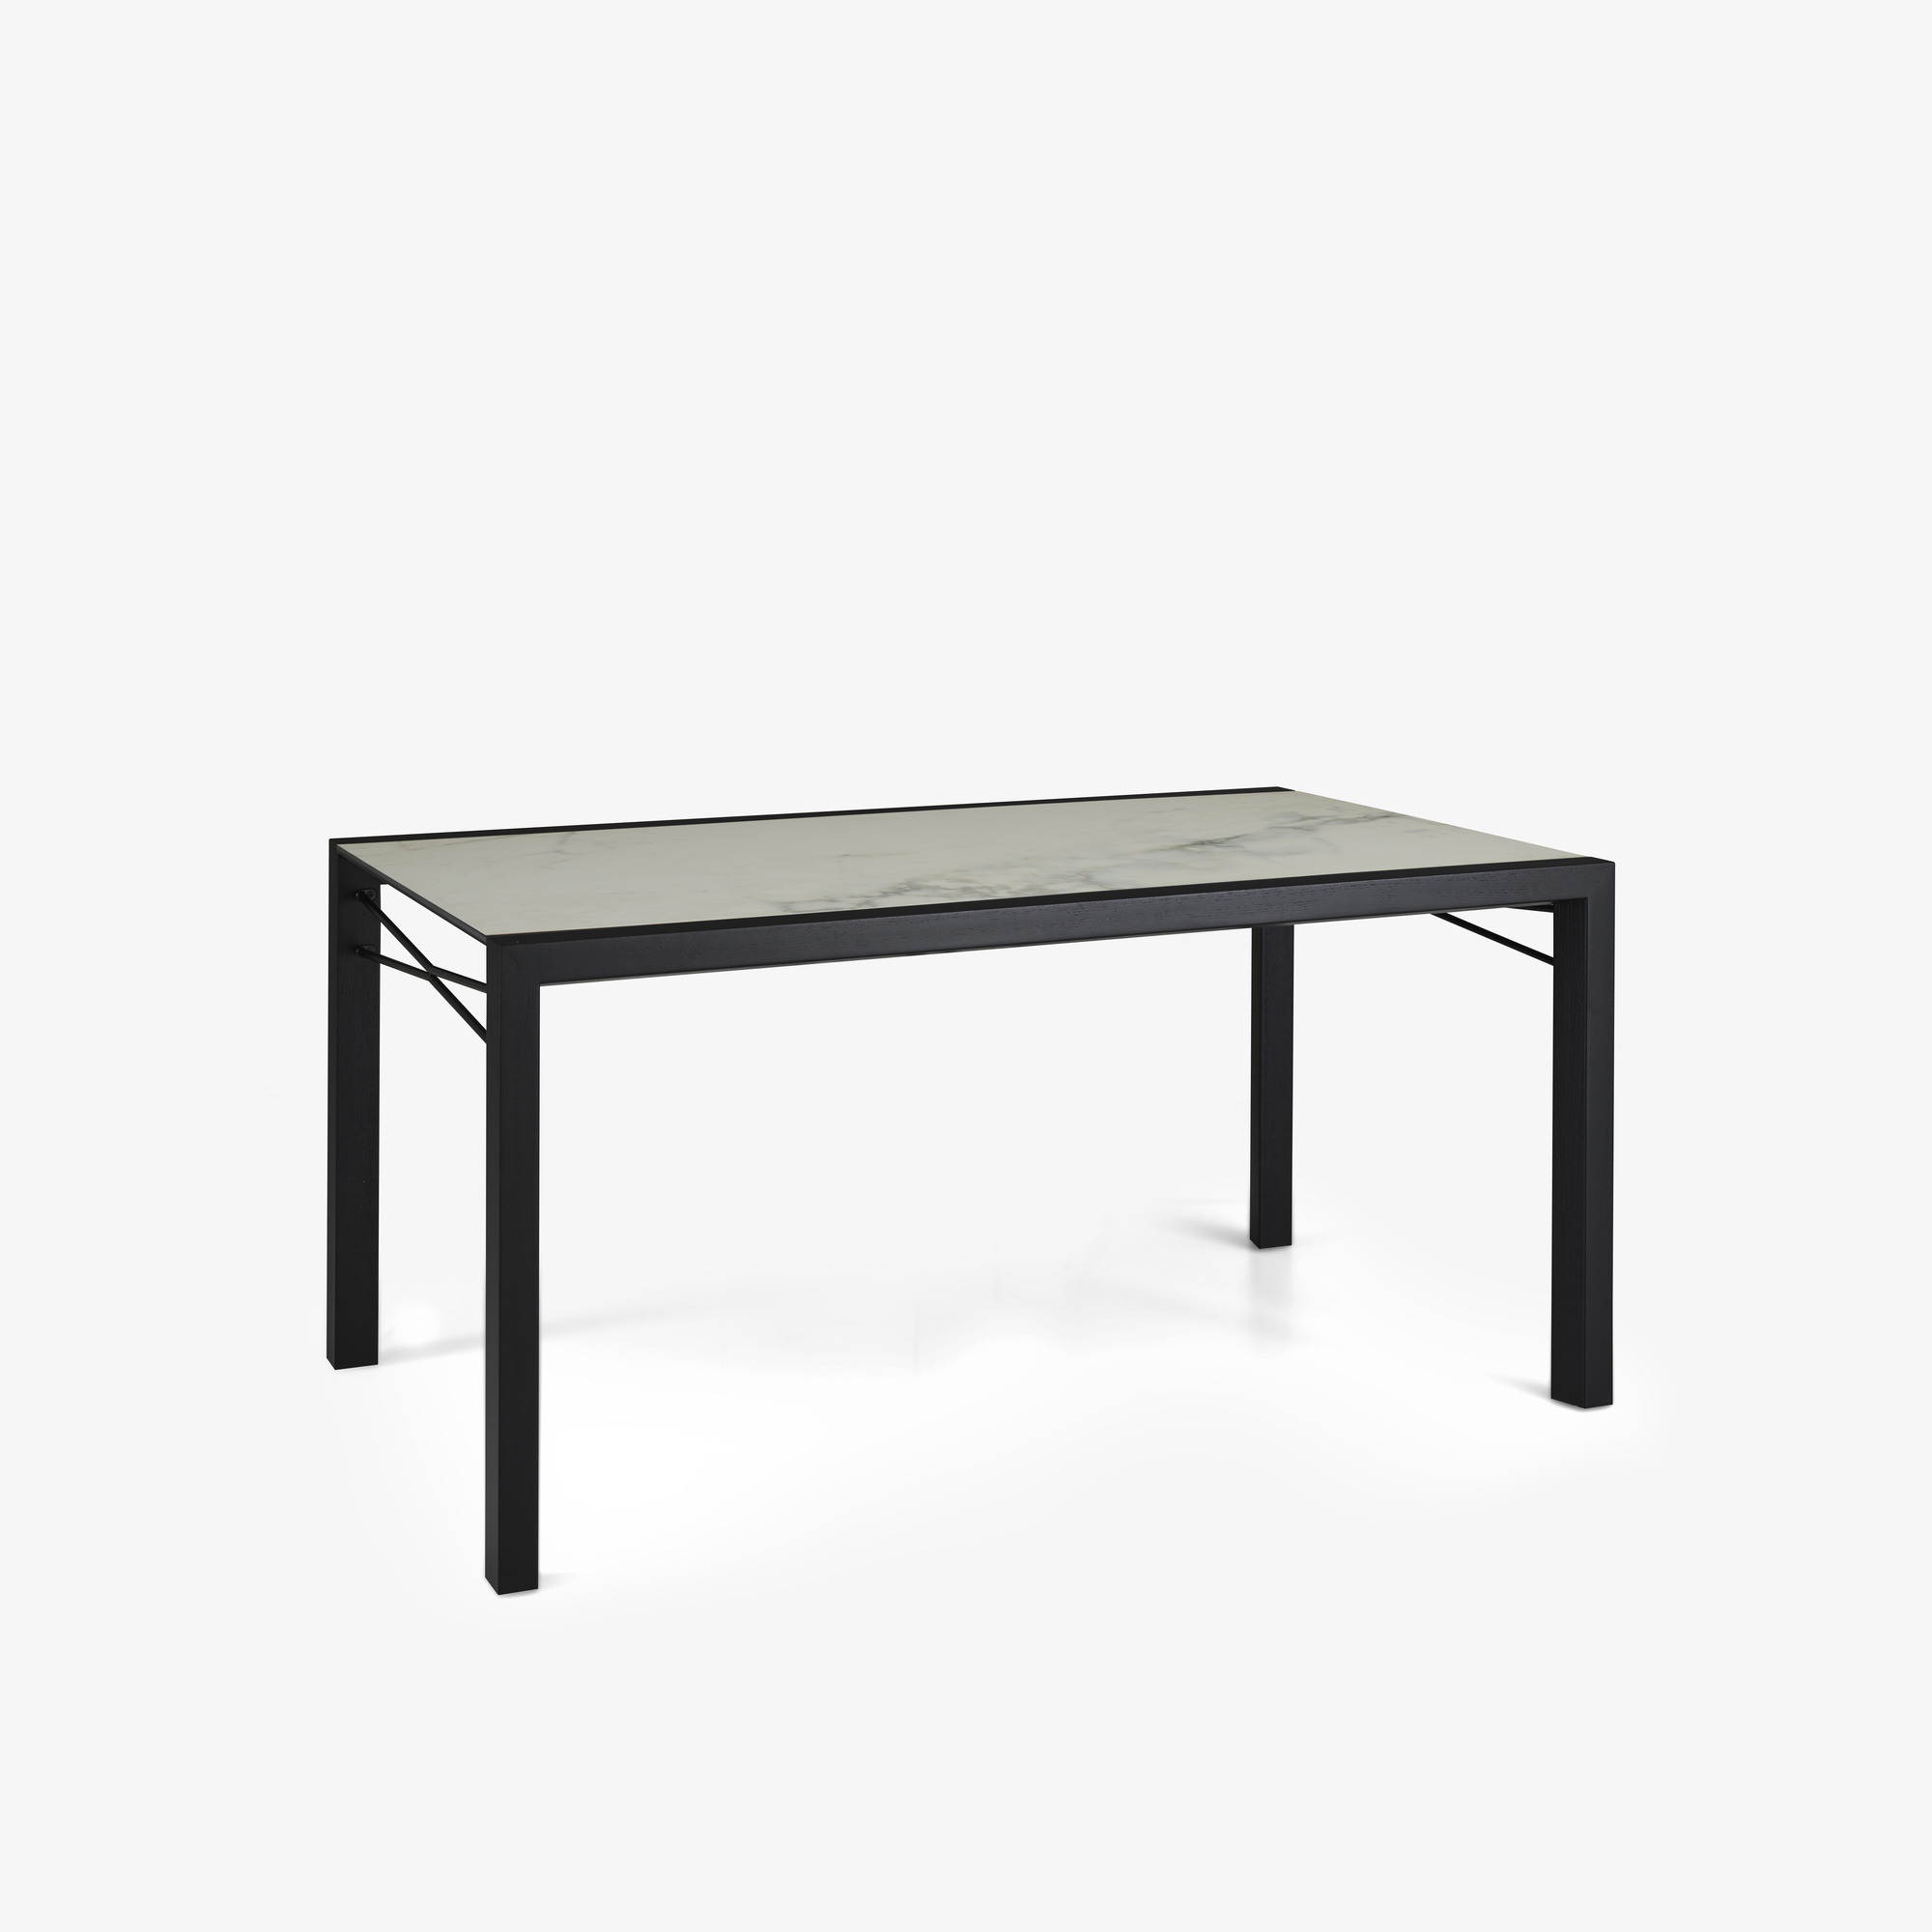 Image Dining table top in white marble-effect ceramic stoneware base in black stained ash 2